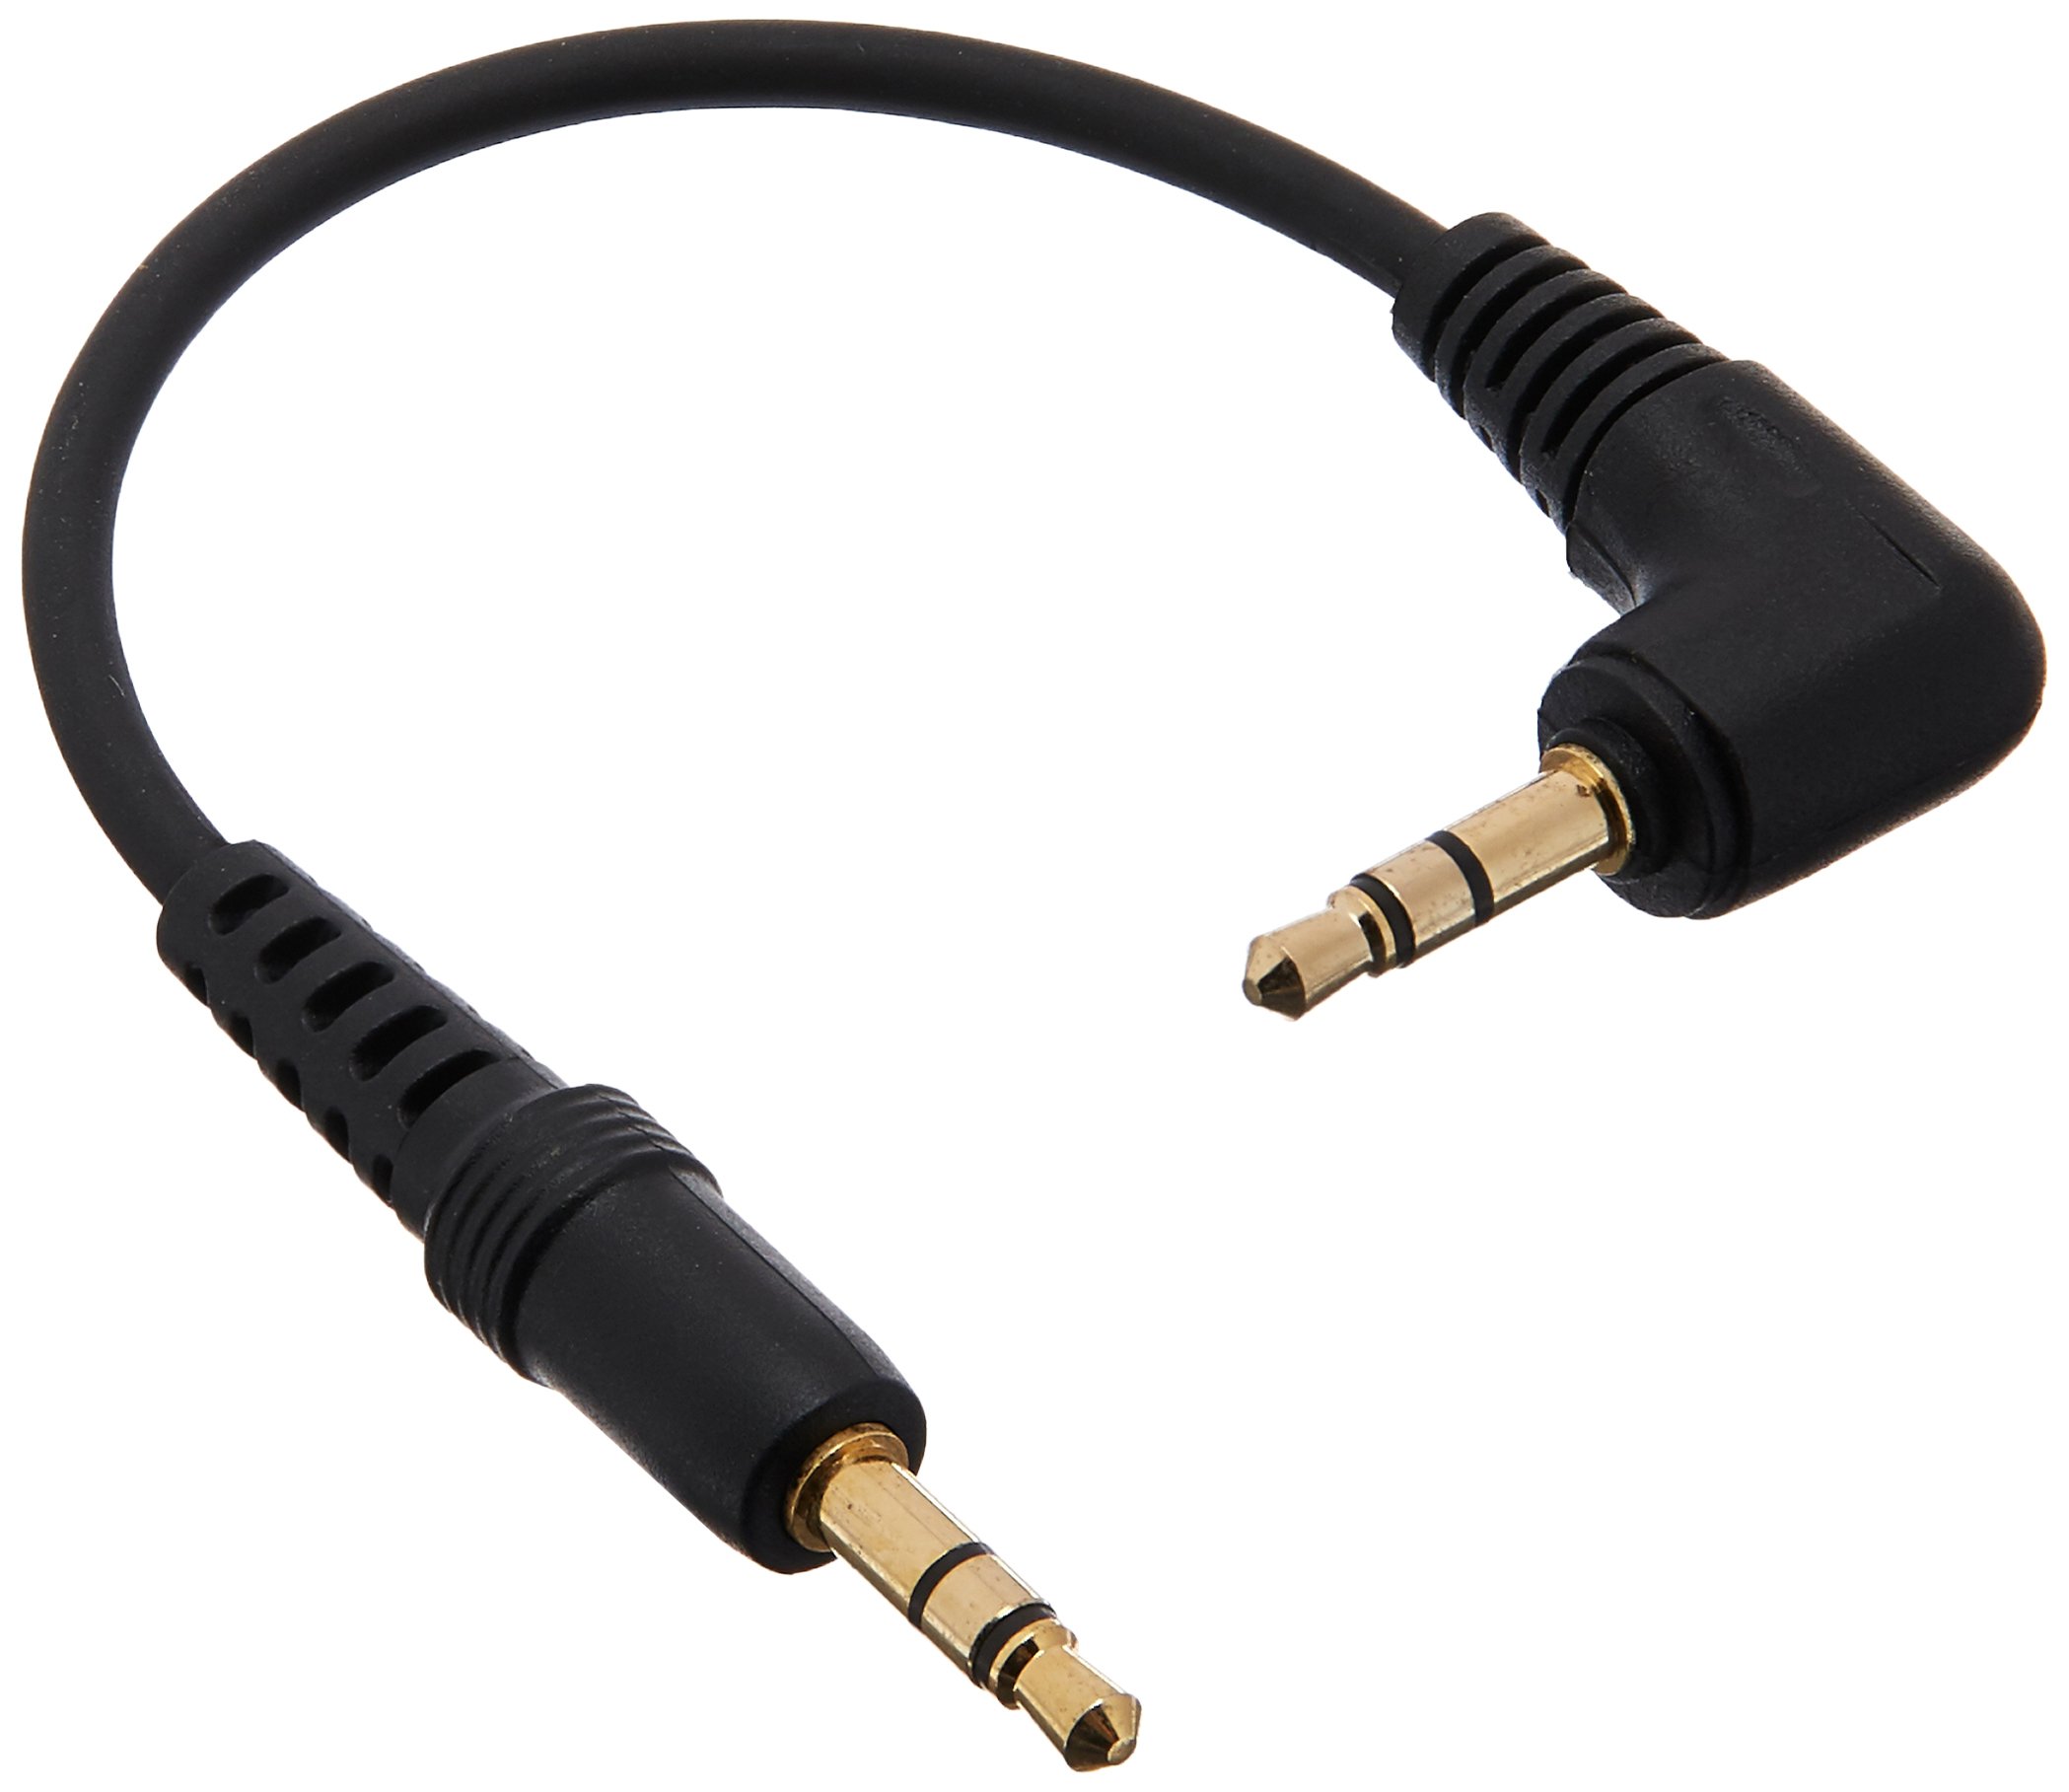 Book Cover 6 inch 3.5mm Male Right Angle to 3.5mm Male Gold Stereo Audio Cable, Nylon Reinforced, Premium Quality Cable